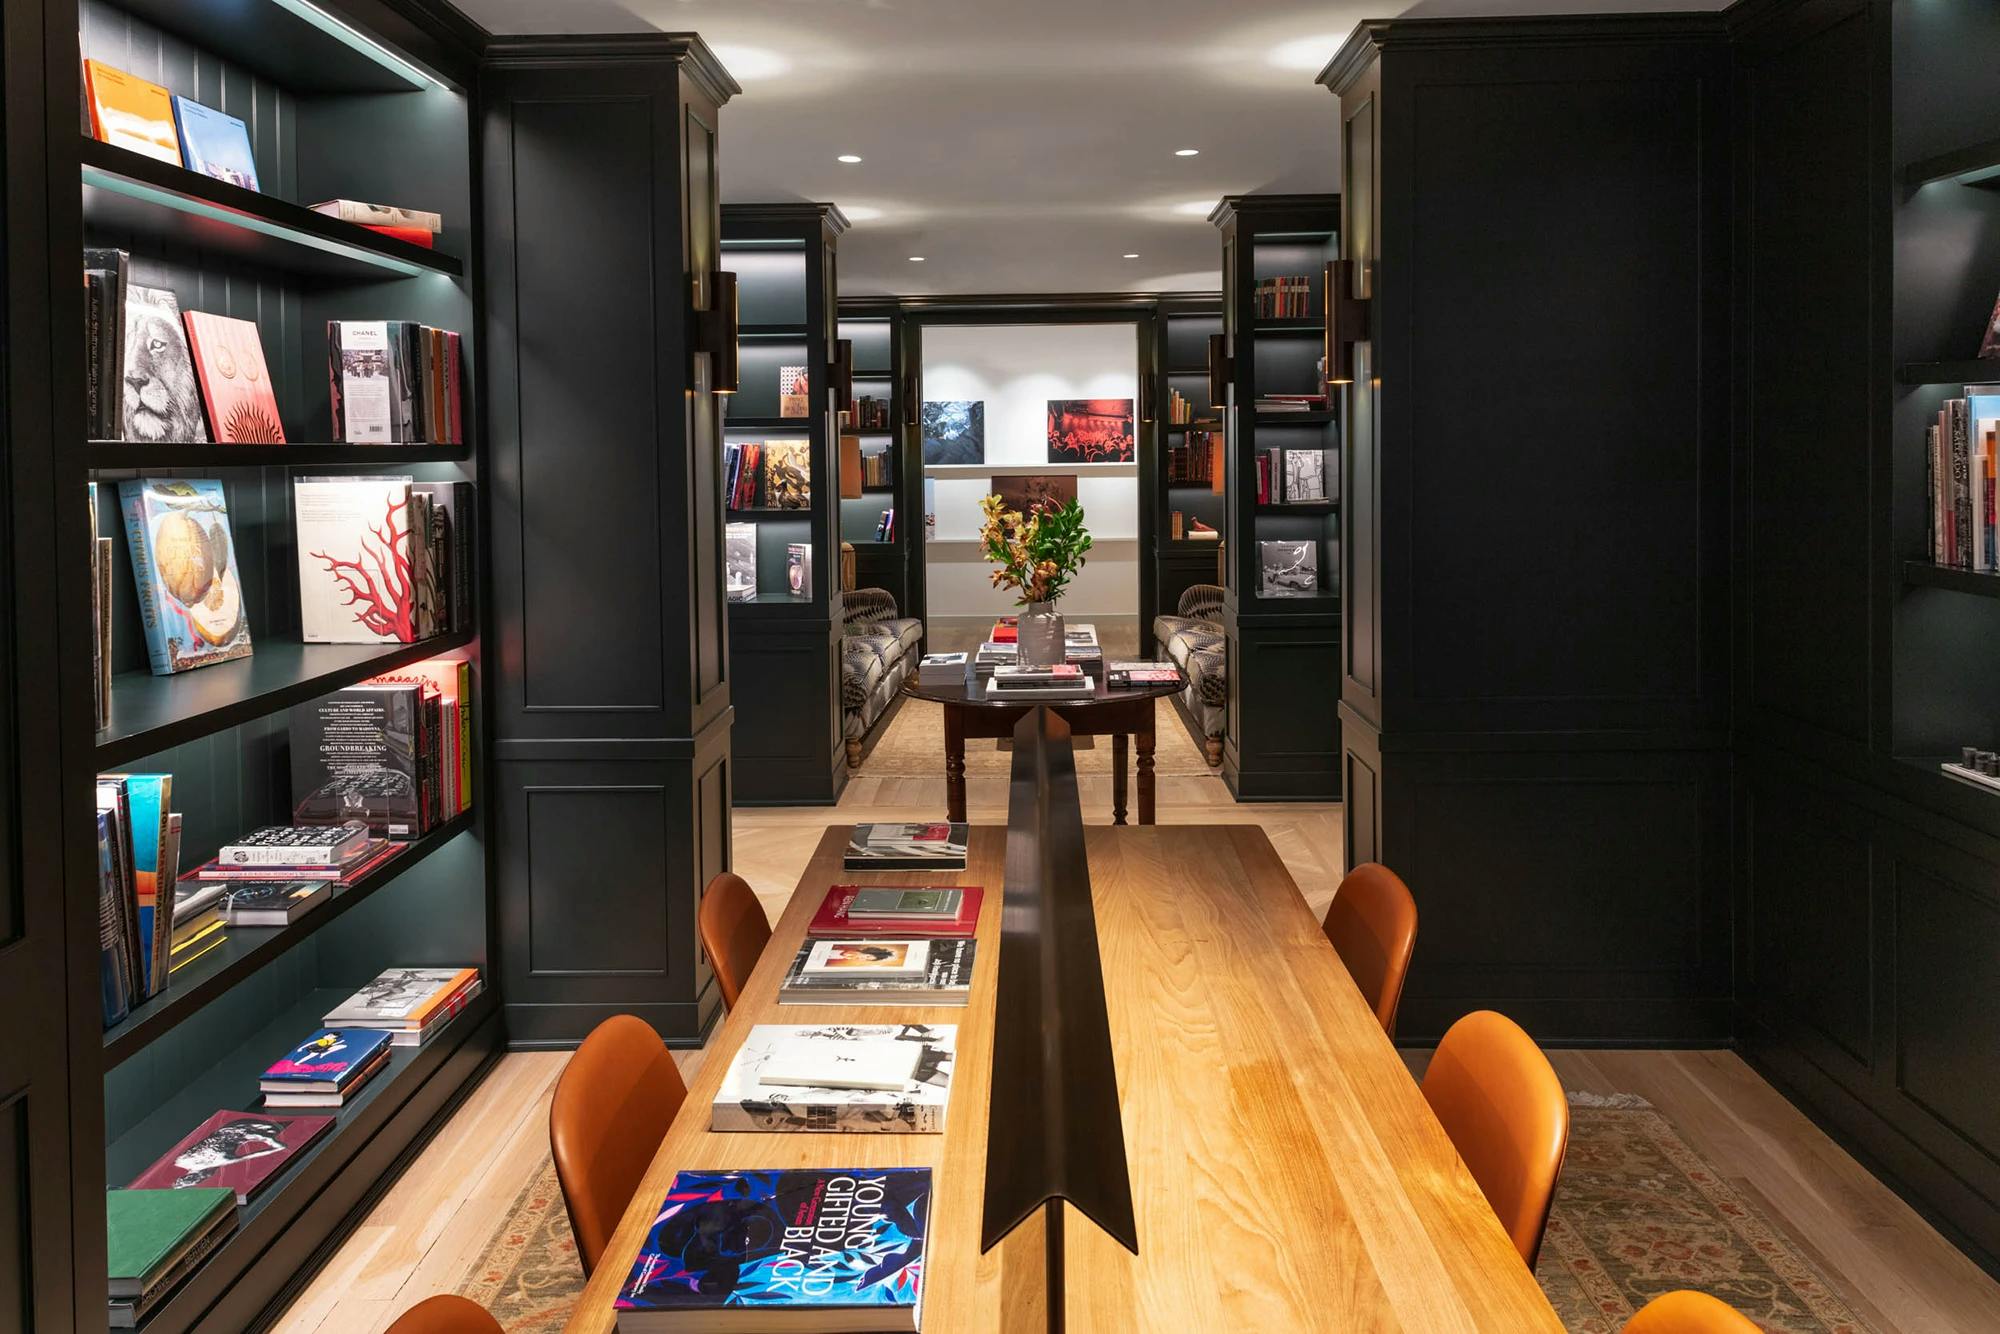 The library area at FIG with a wood table and dark green shelves filled with colorful books.